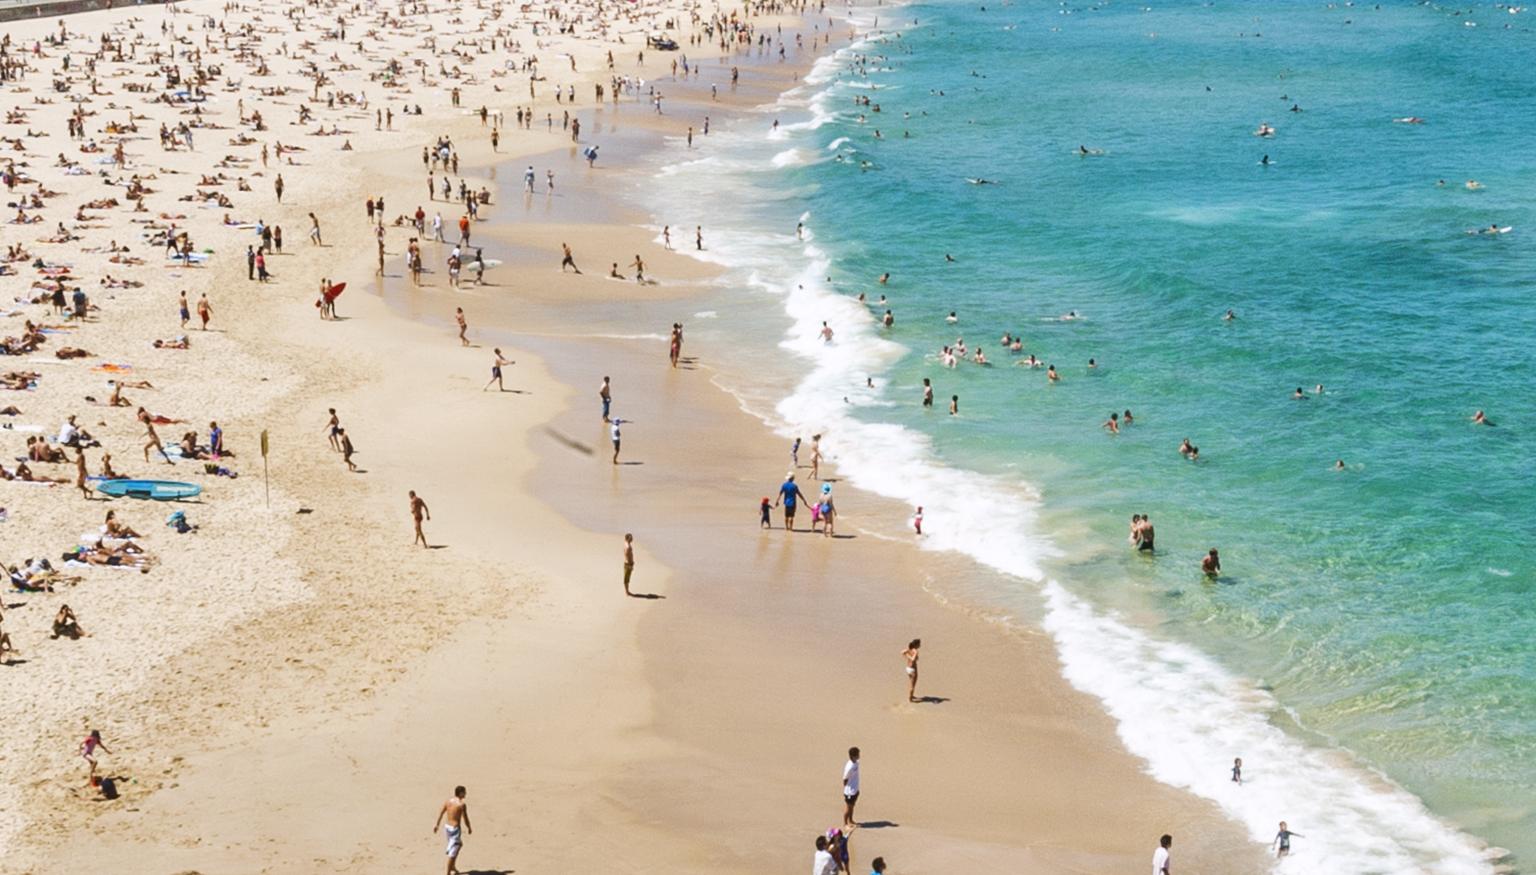 Bad news for anyone heading to Sydney beaches this weekend | Nova 969